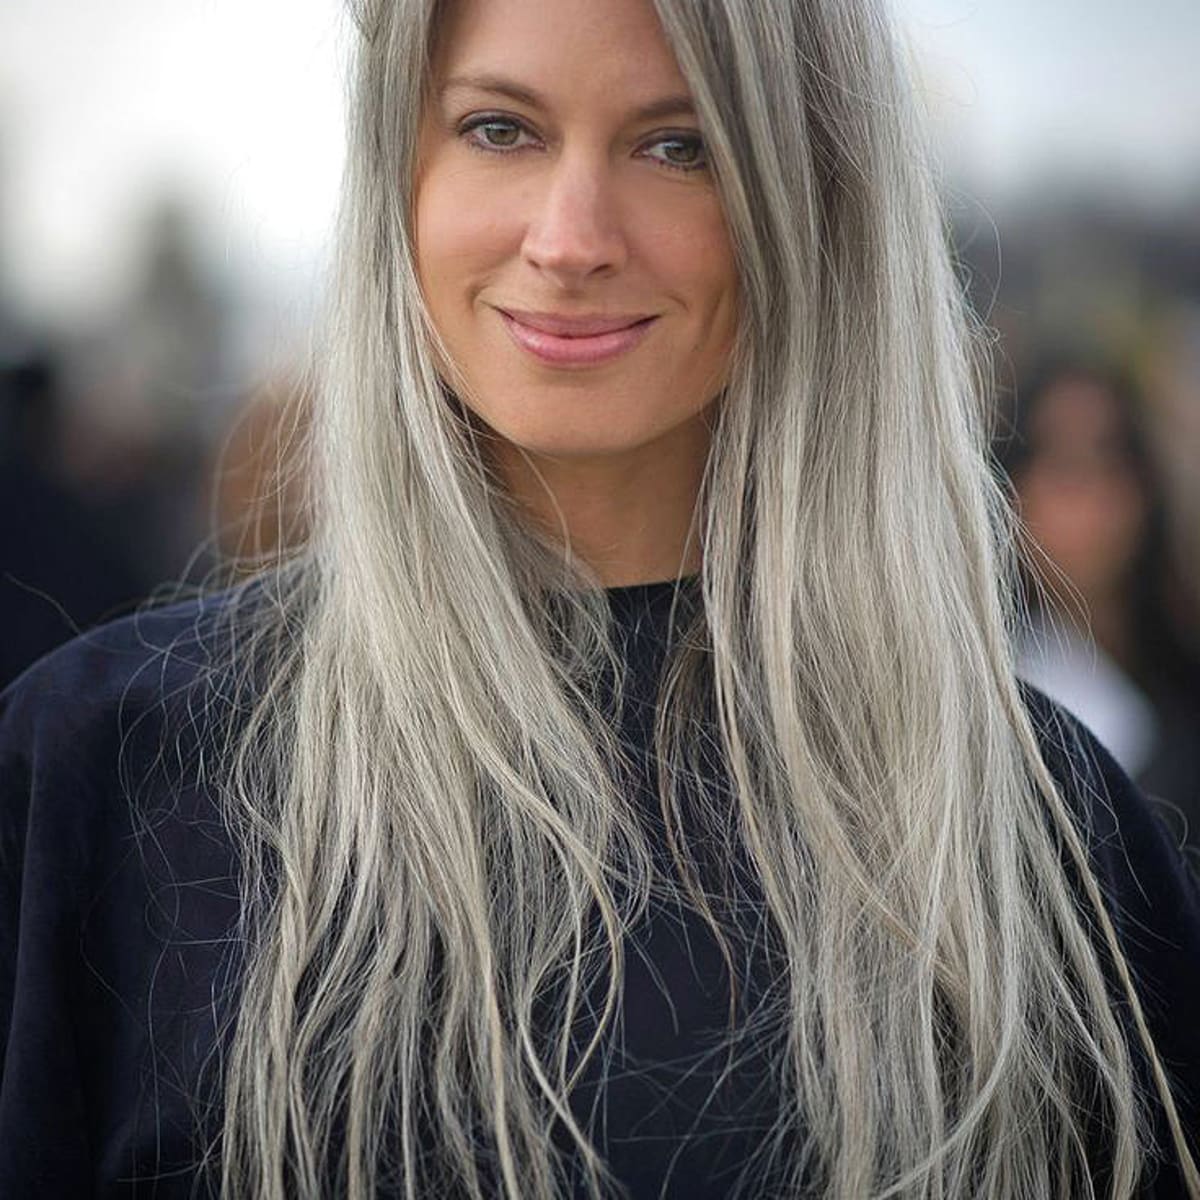 GREY HAIR IS A TOP BEAUTY TREND FOR 2015 – AND I'M WAY AHEAD - Beautygeeks